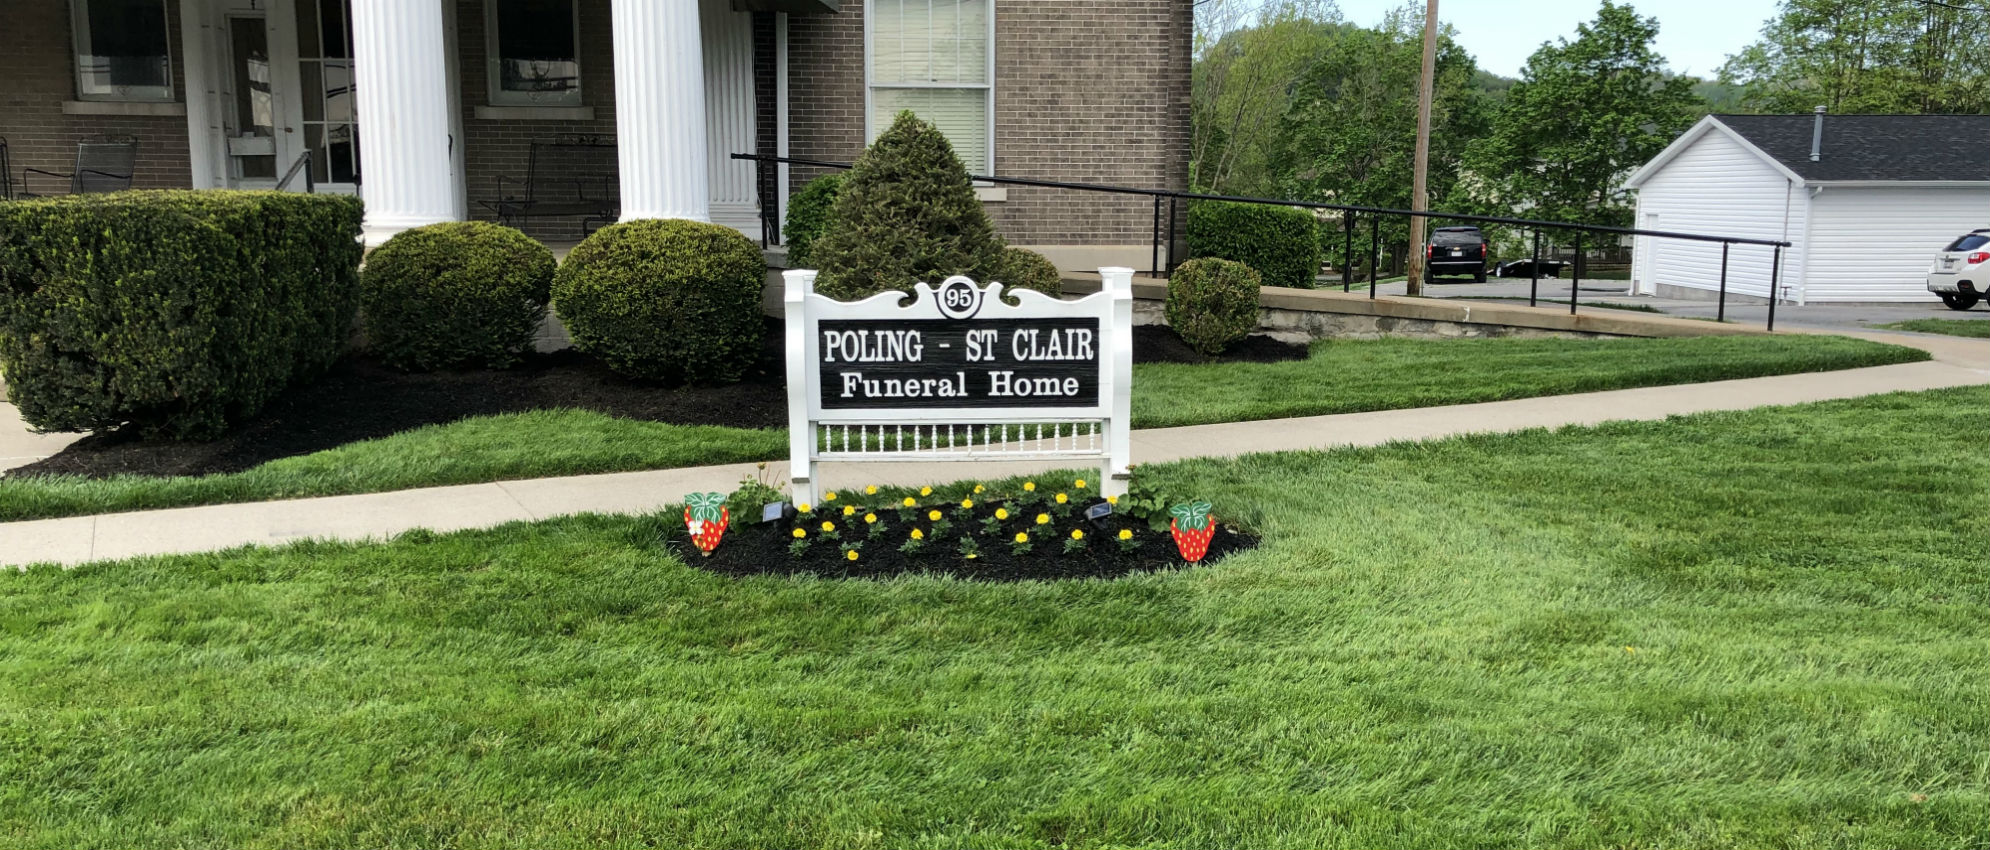 Home | Poling - St. Clair Funeral Home & Crematory - Buckhannon, WV1990 x 850